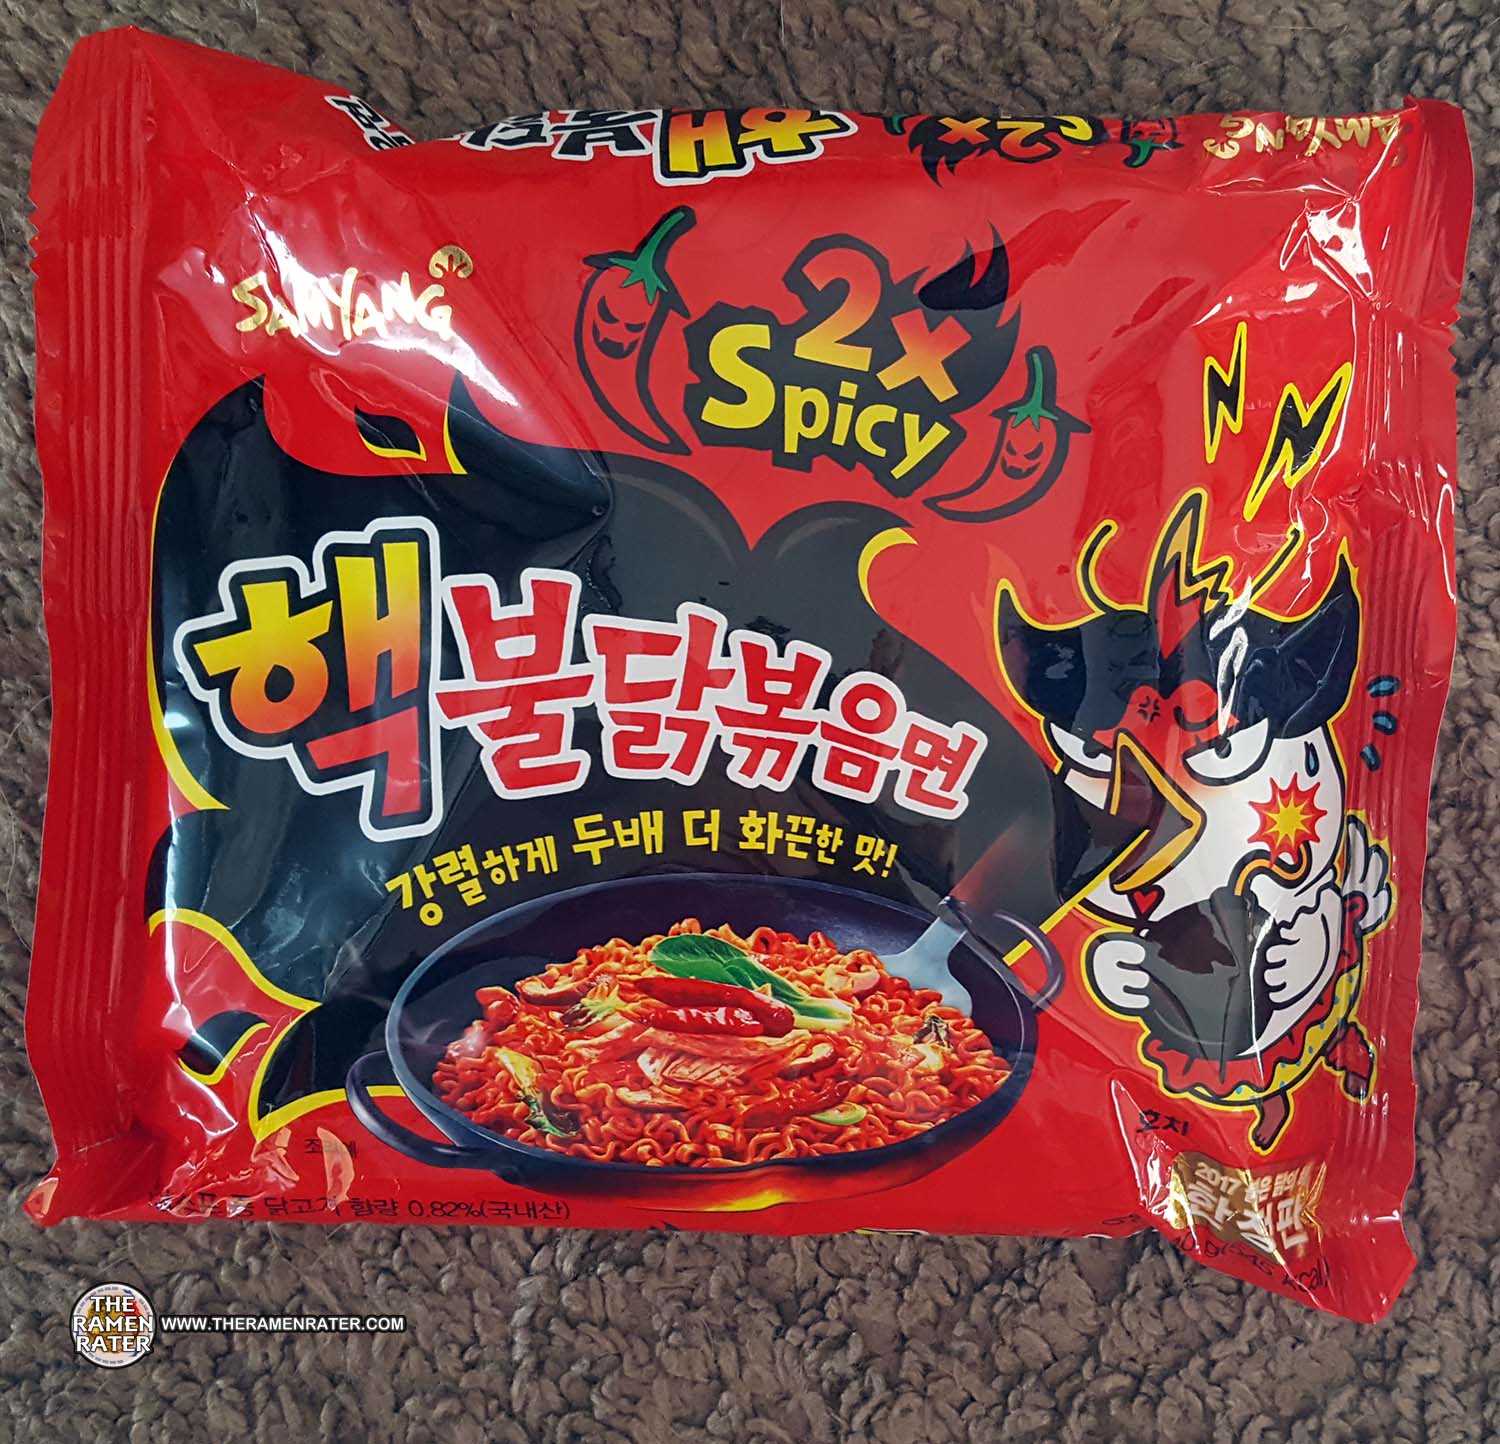 Spicy Korean Noodles From Anders & Ji-Min! - The Ramen Rater